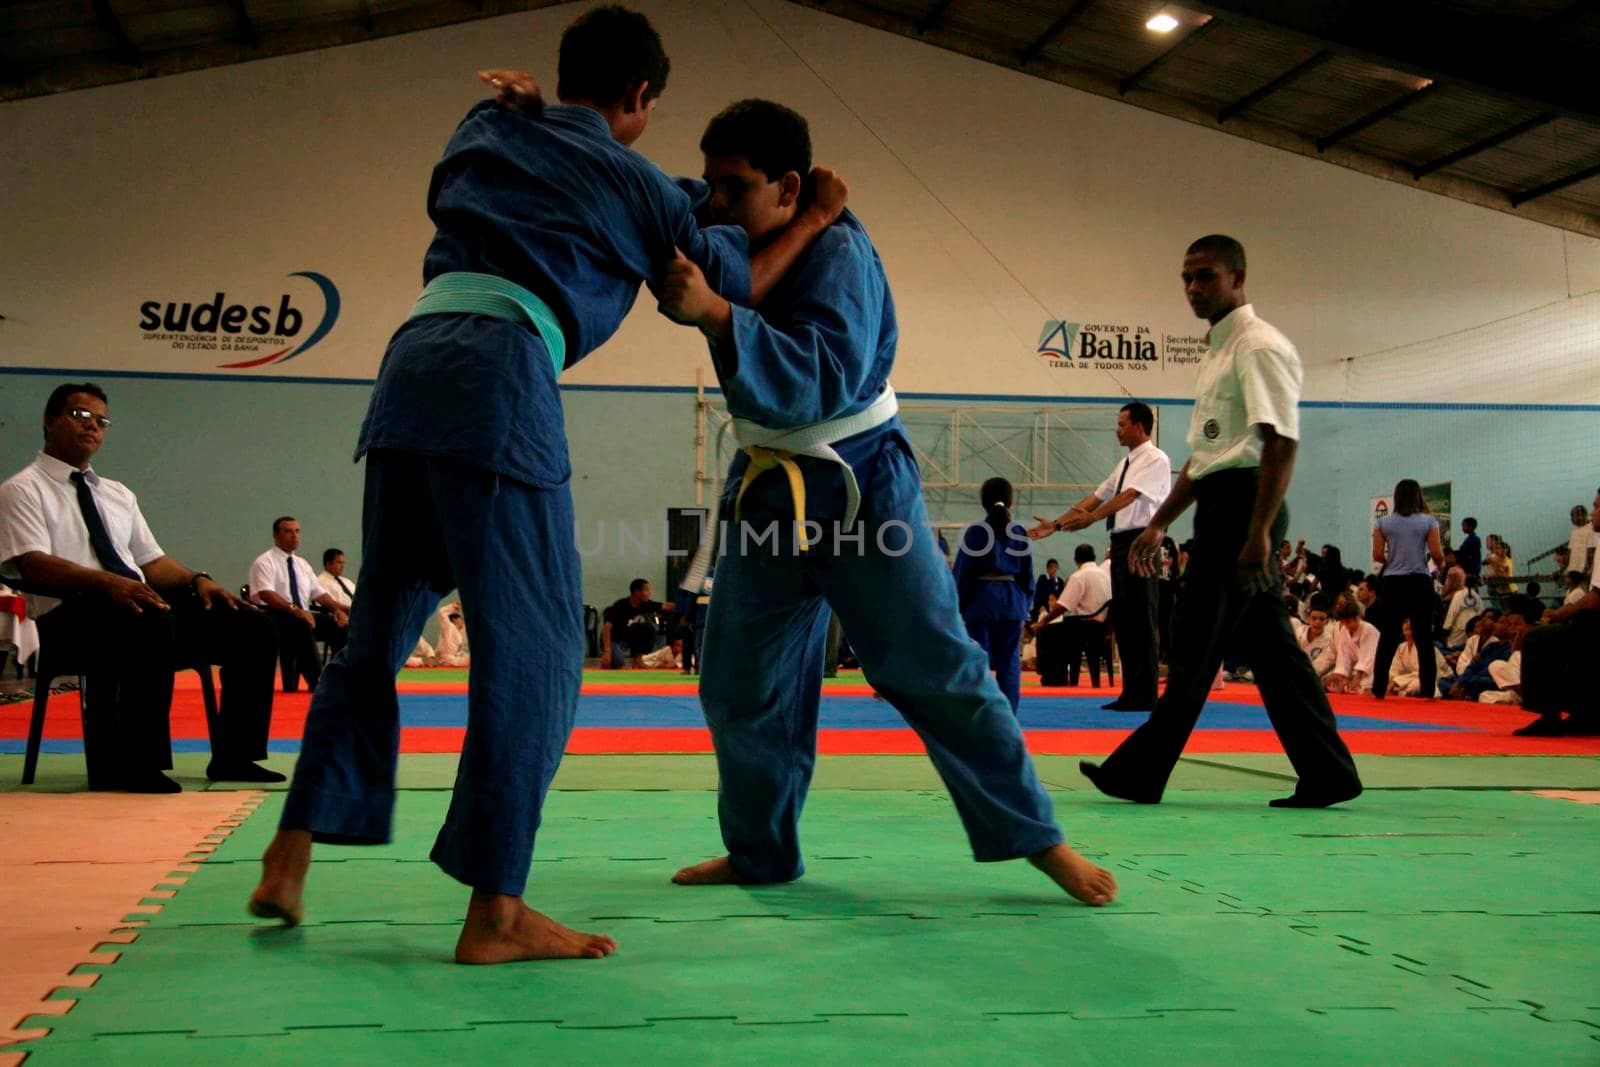 eunapolis, bahia / brazil - may 31, 2009: athletes are seen during the judo championship in the city of Eunapolis.